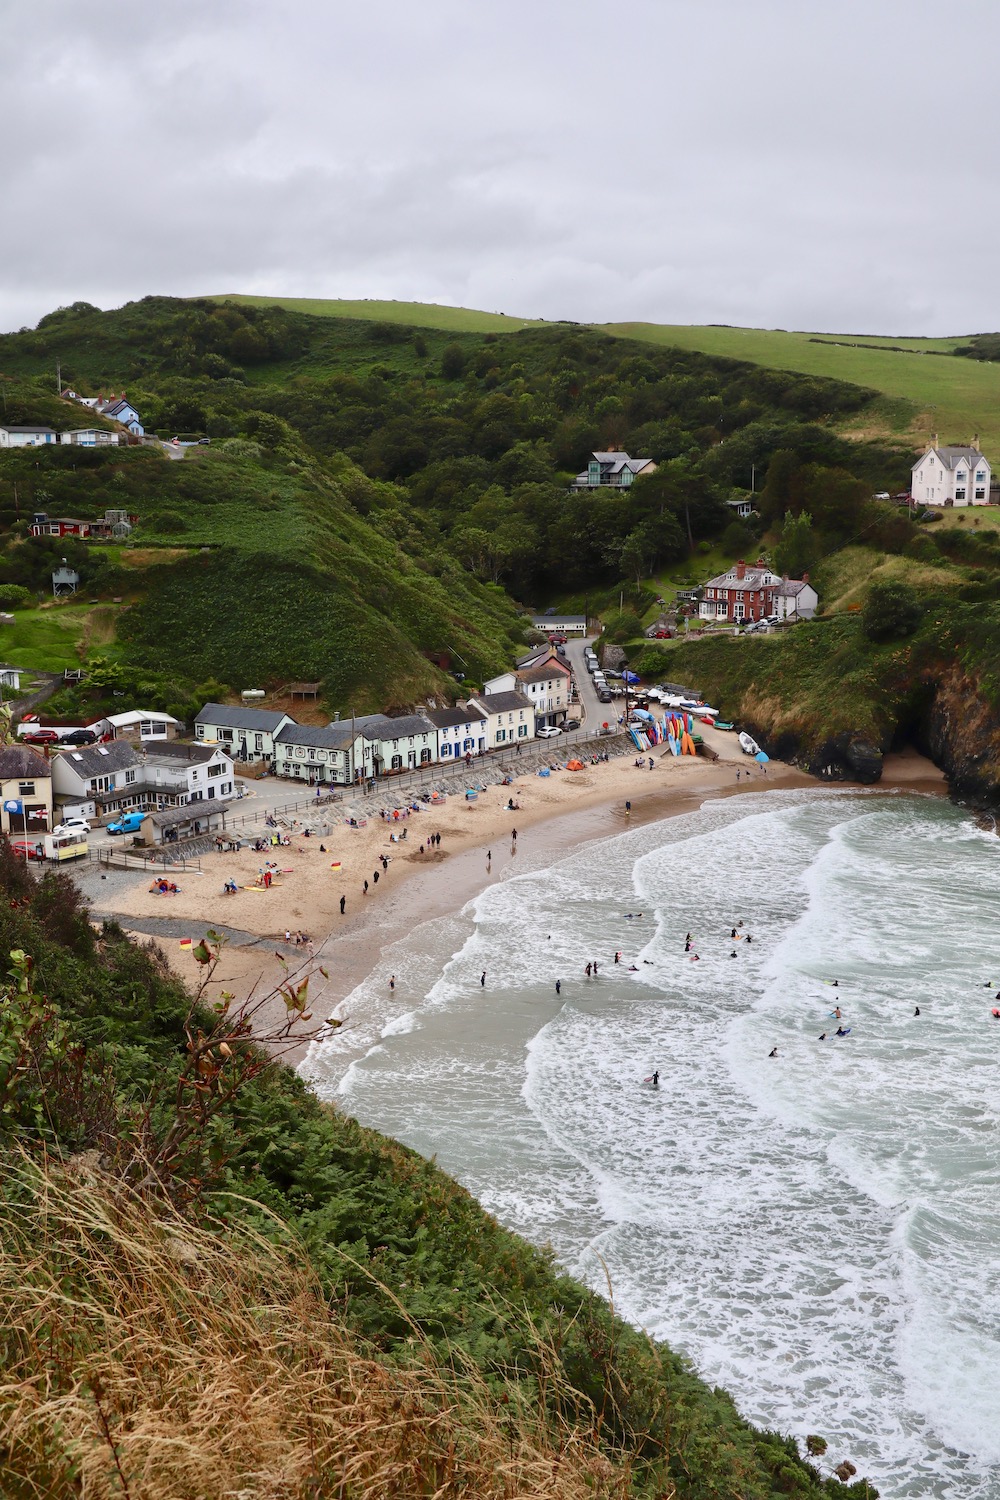 Your mini guide to Llangrannog in Ceredigion, West Wales